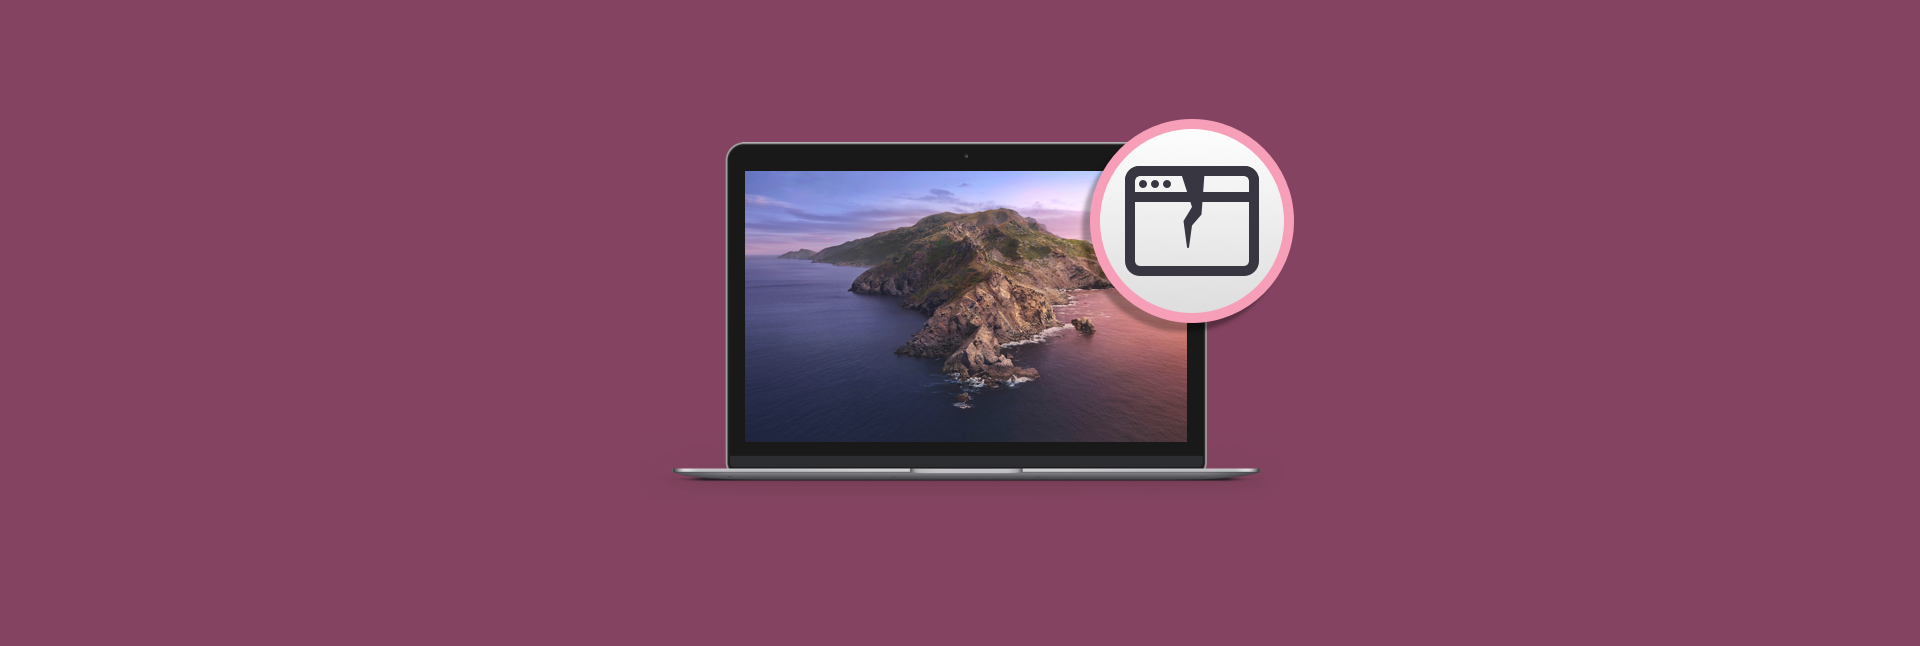 adobe photoshop for mac catalina free download